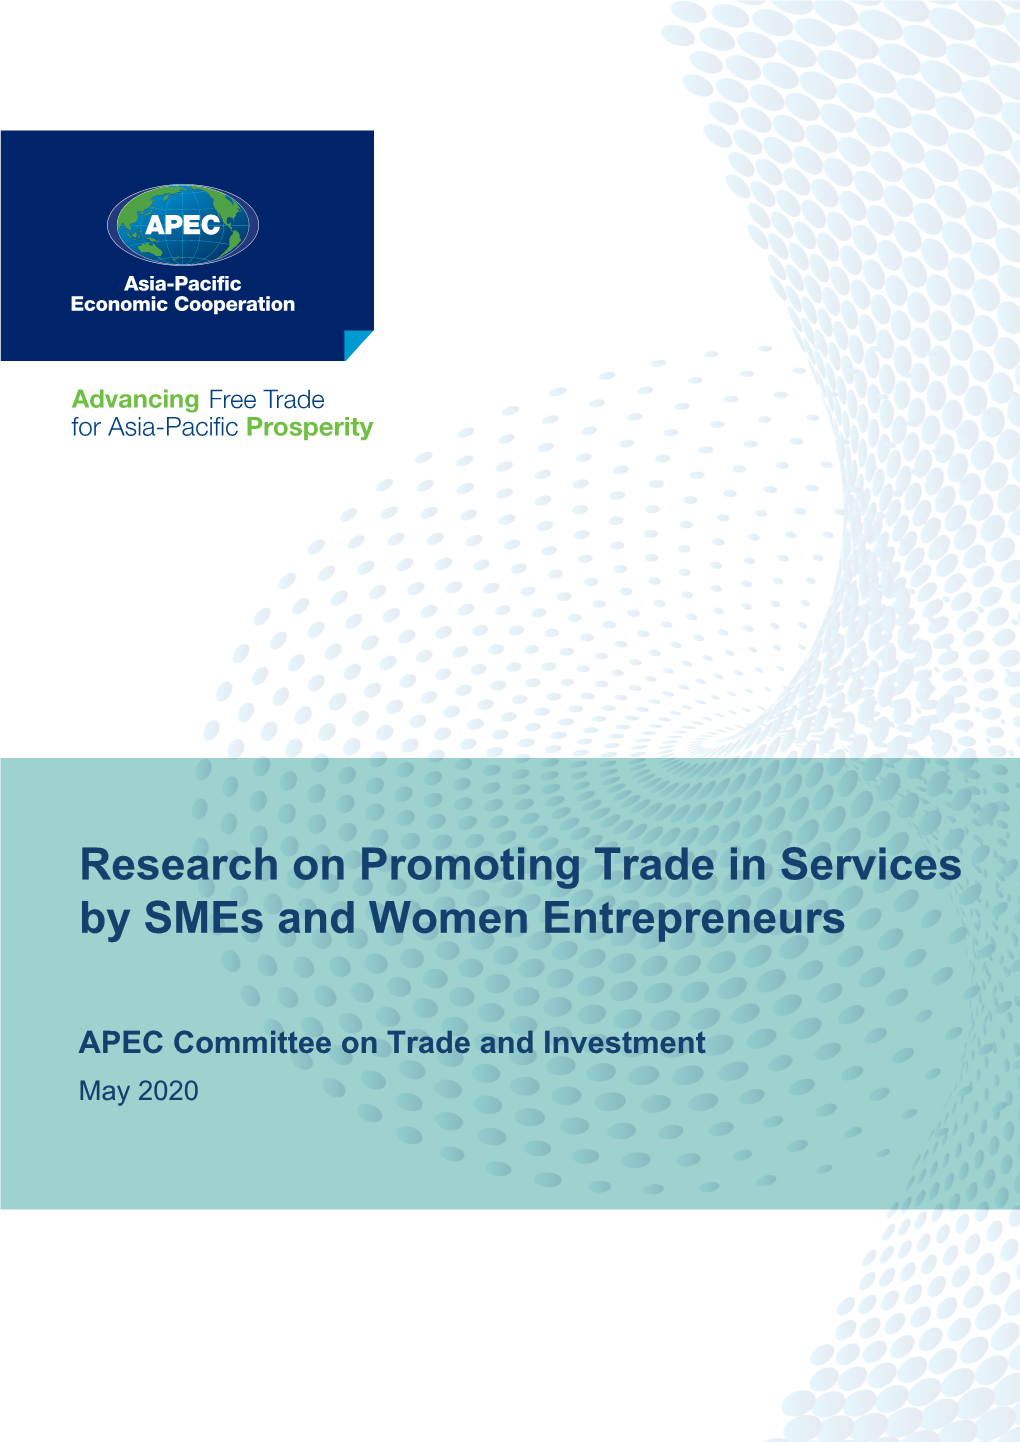 Research on Promoting Trade in Services by Smes and Women Entrepreneurs